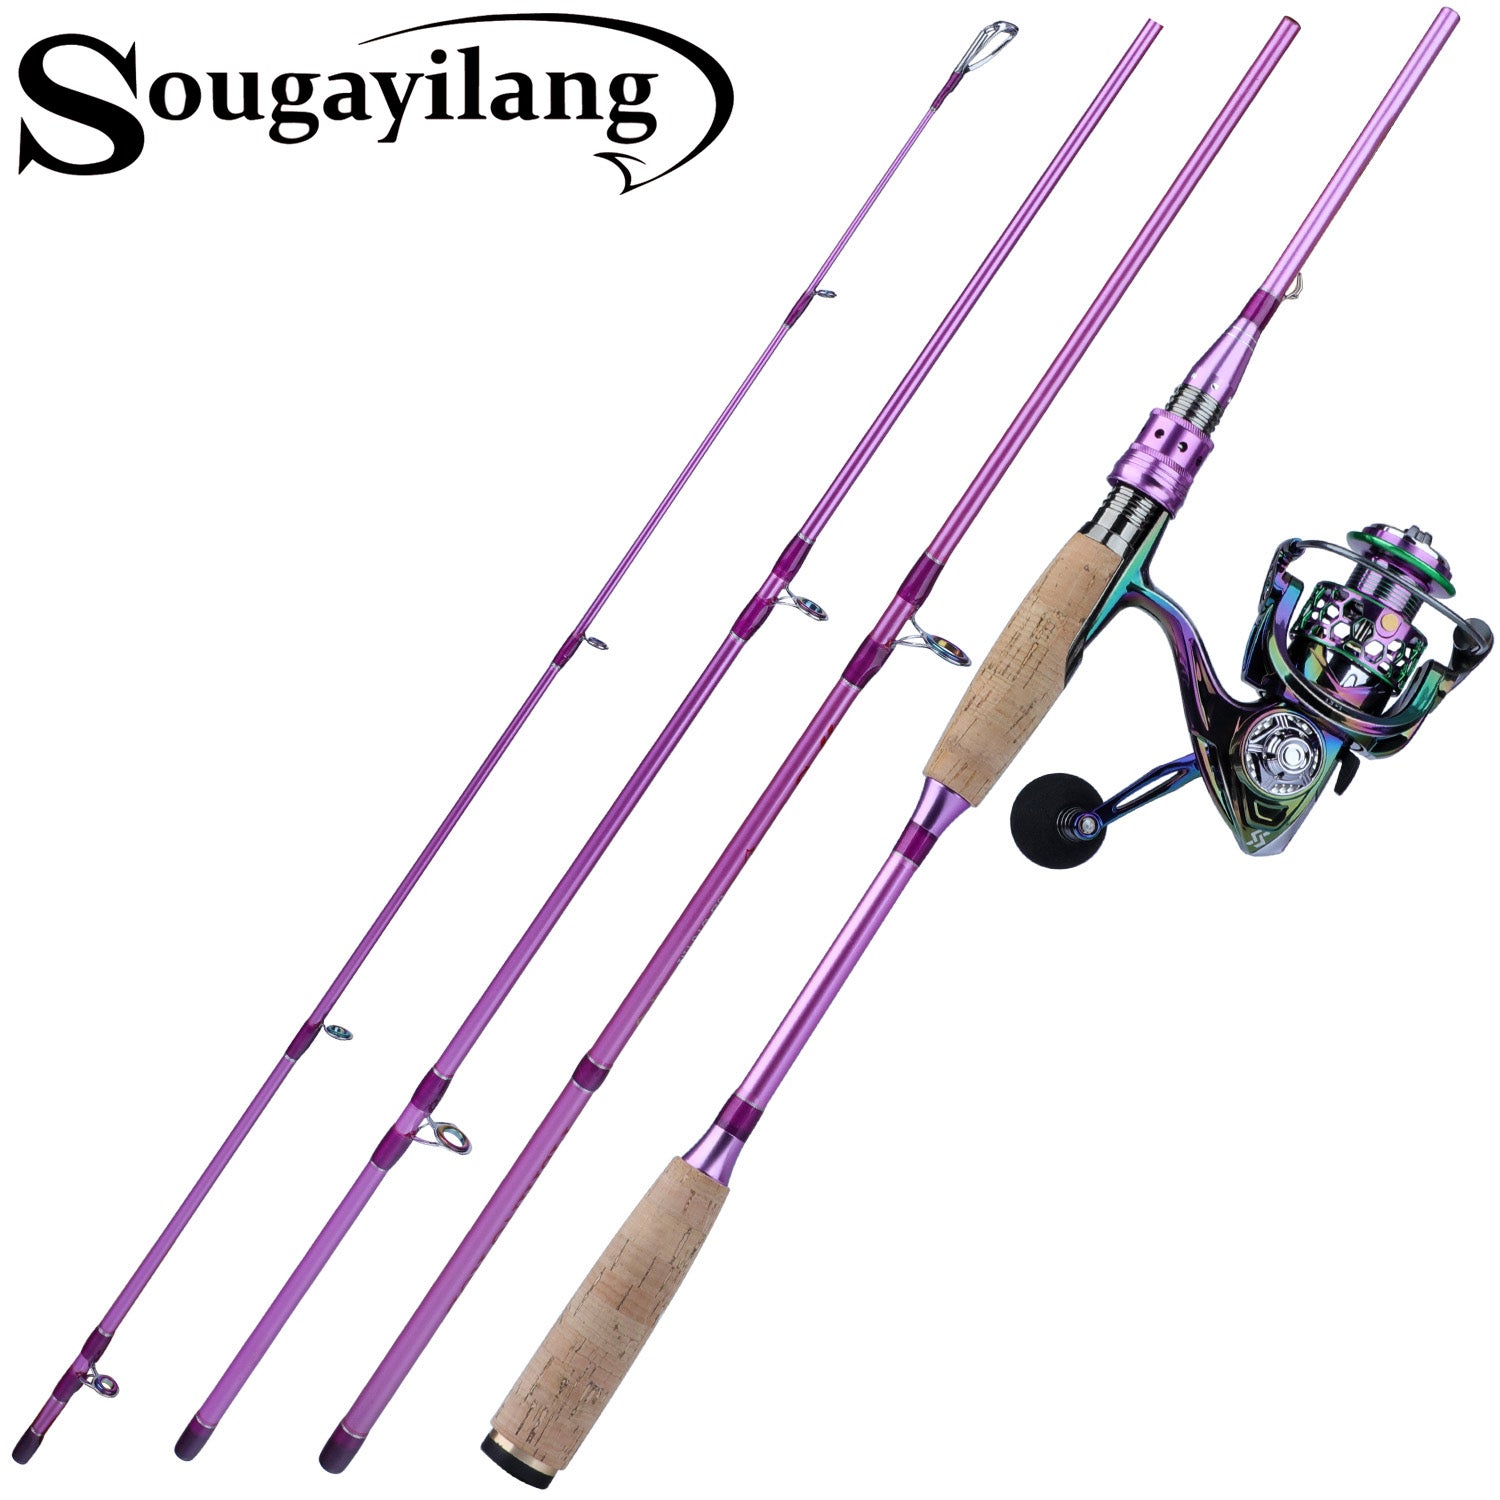 Sougayilang 4 Pieces Insert Spinning/Casting 6'6”Fishing Rod and Rod  Combo,30 Ton Carbon Fiber Portable Fishing Poles and Reel for Travelling  and Bass : : Fashion